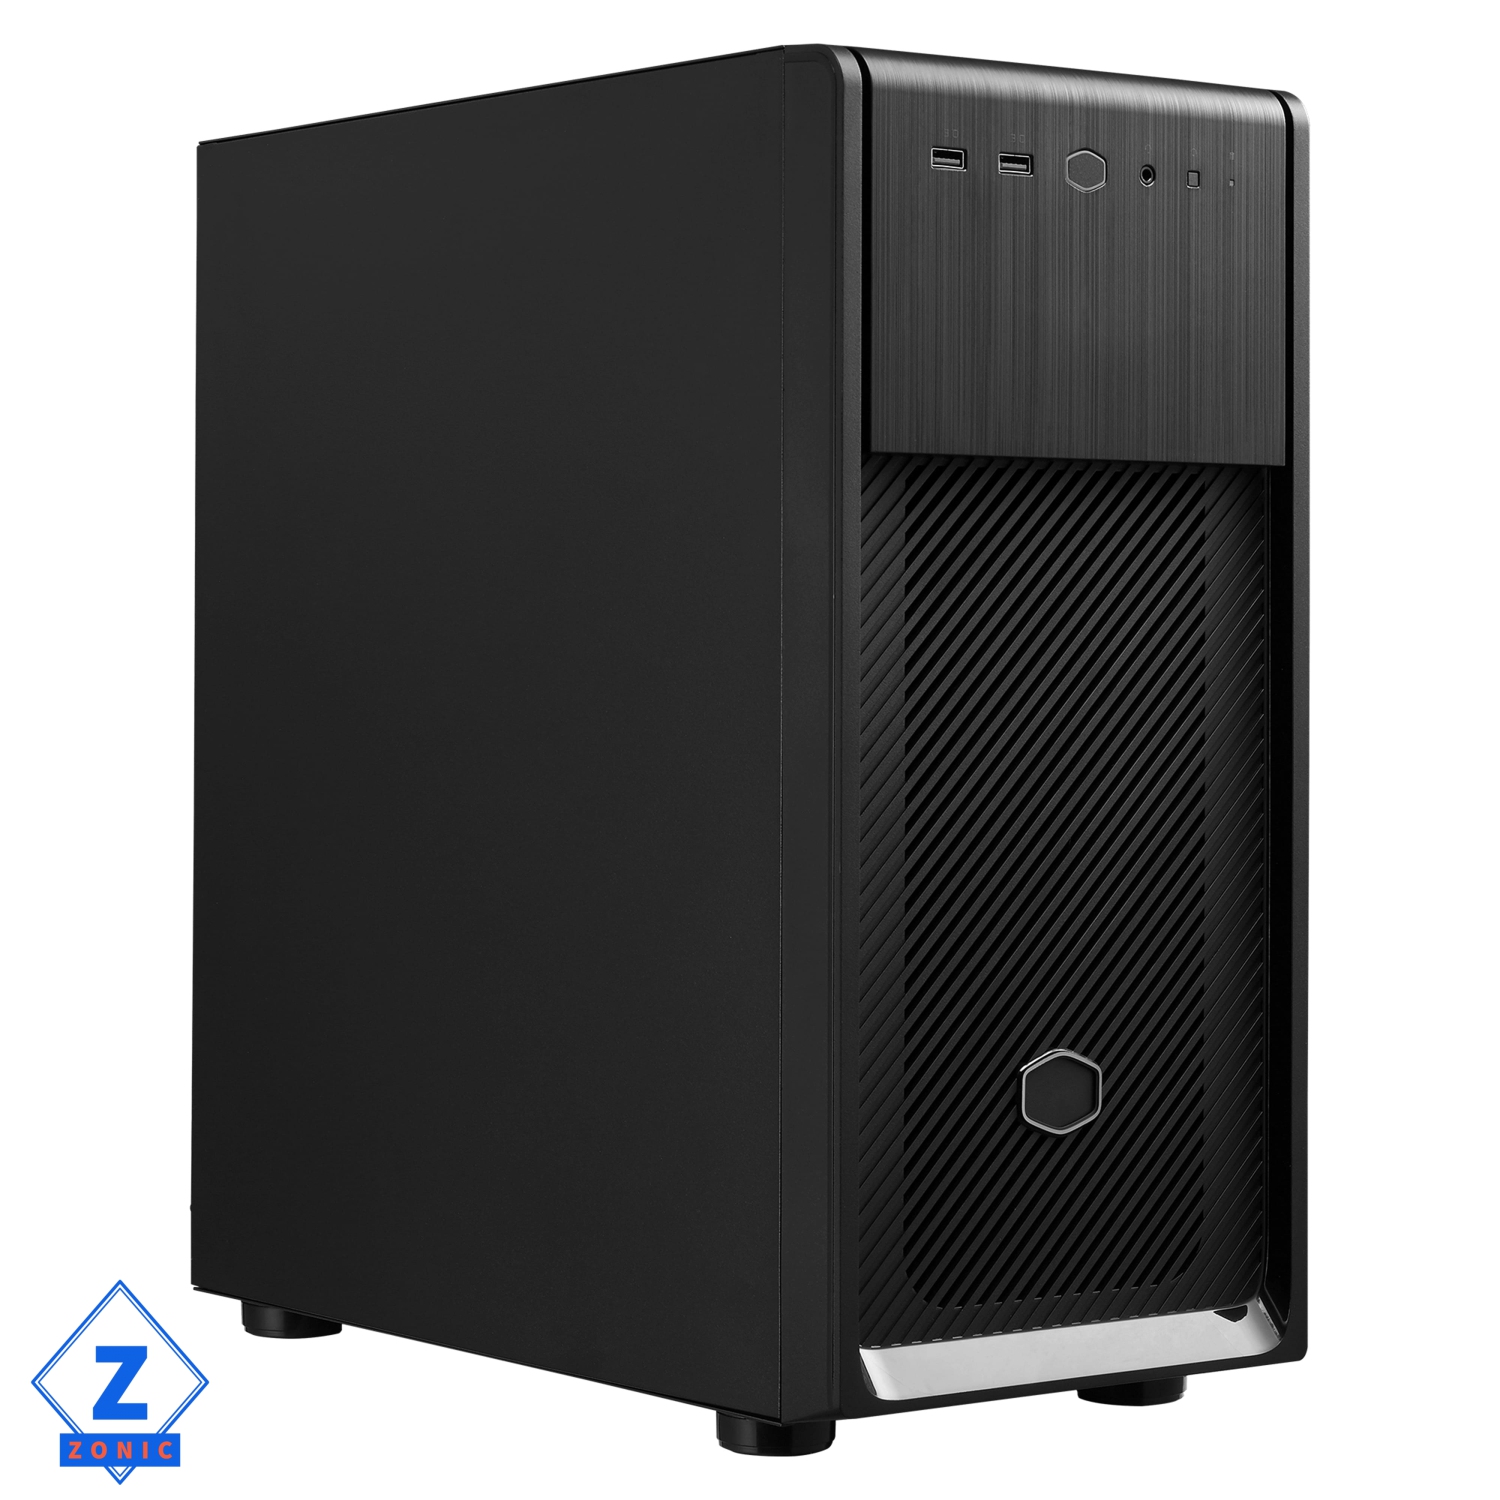 Zonic Business Custom PC, Intel Core i9-12900K, 16 Cores, 1 TB NVME SSD, 4 TB HD , 64 GBDDR 5 RAM, Build in Wi-Fi, Keyboard, and Mouse, Windows 11 Pro